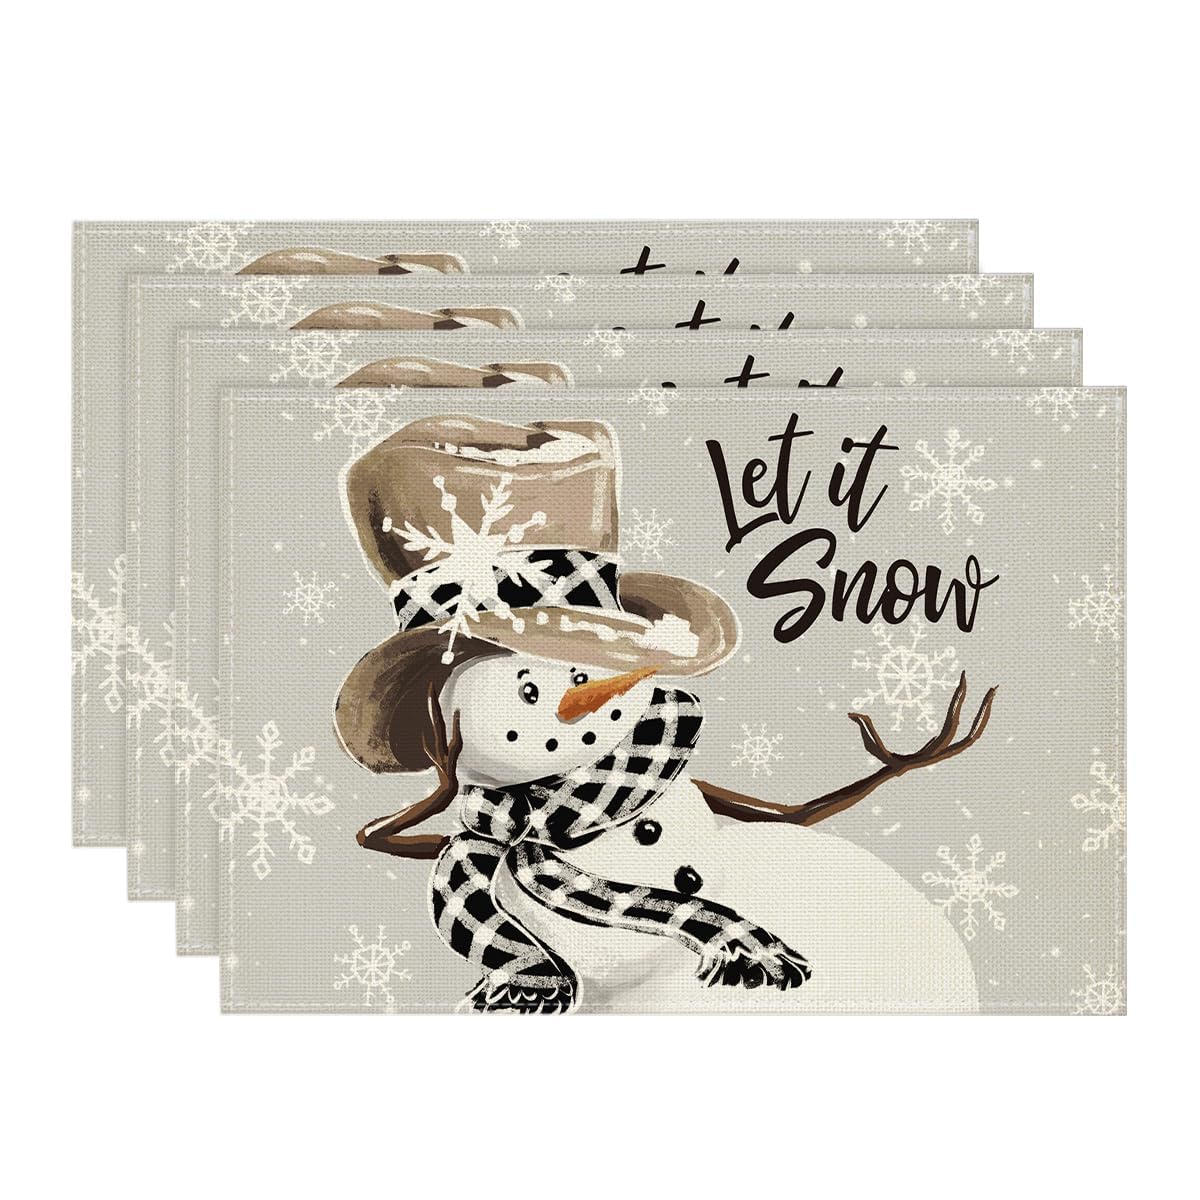 Artoid Mode Grey Snowman Snowflakes Let it Snow Winter Placemats Set of 4, 12x18 Inch Seasonal Christmas Table Mats for Party Kitchen Dining Decoration